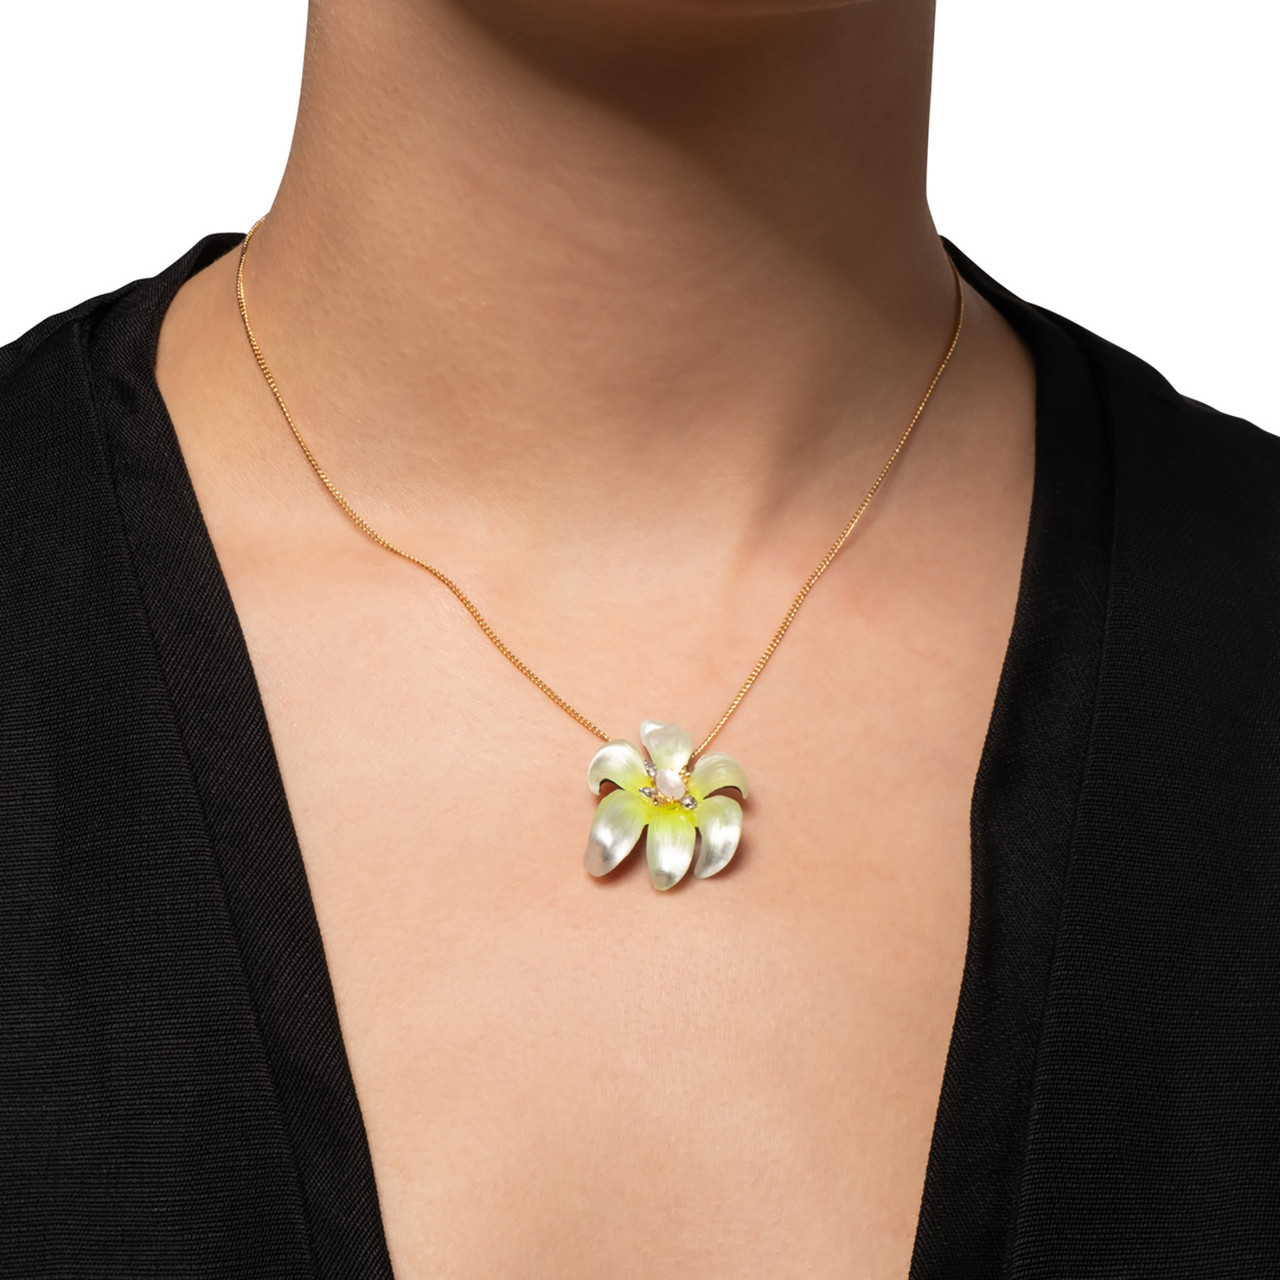 Lily Lucite Flower Pendant White, Alexis Bittar, tomfoolery